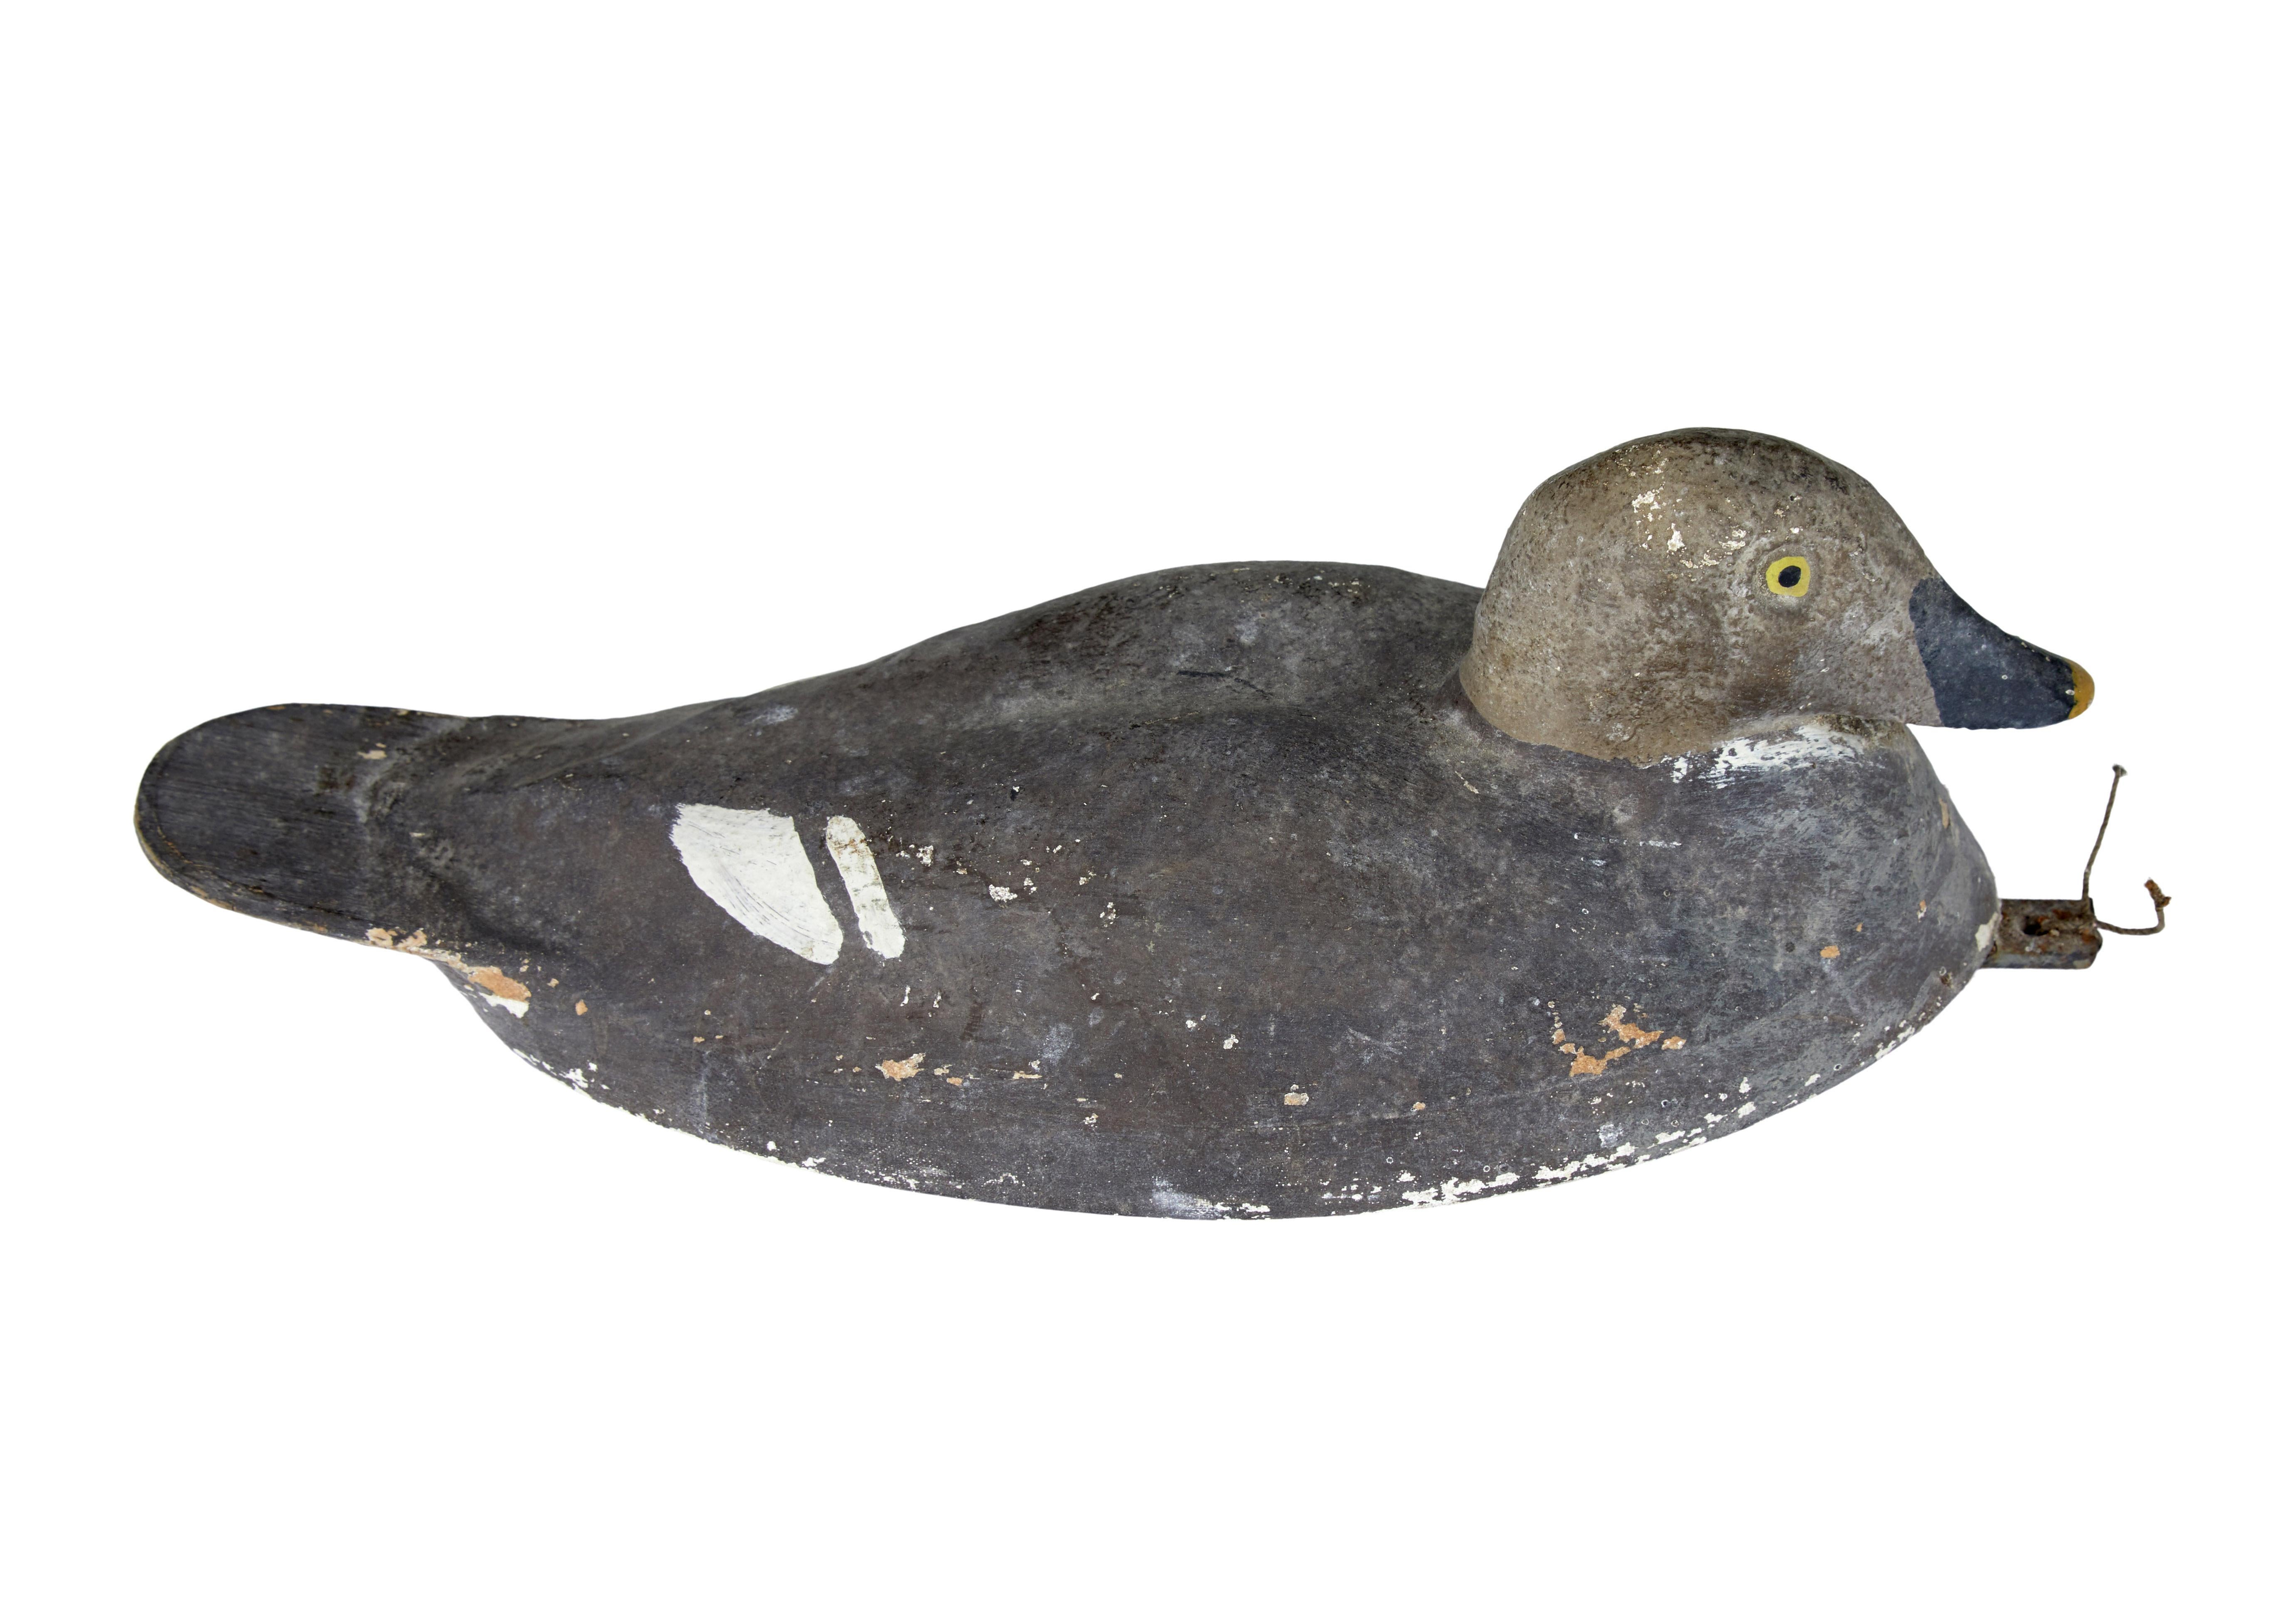 Early 20th century hand painted decoy duck circa 1920.

Hand made with Swedish label ideal vetter on the underside. Hand painted in dapple greys with white feathers and black beak.

Expected surface marks and losses to paint work.